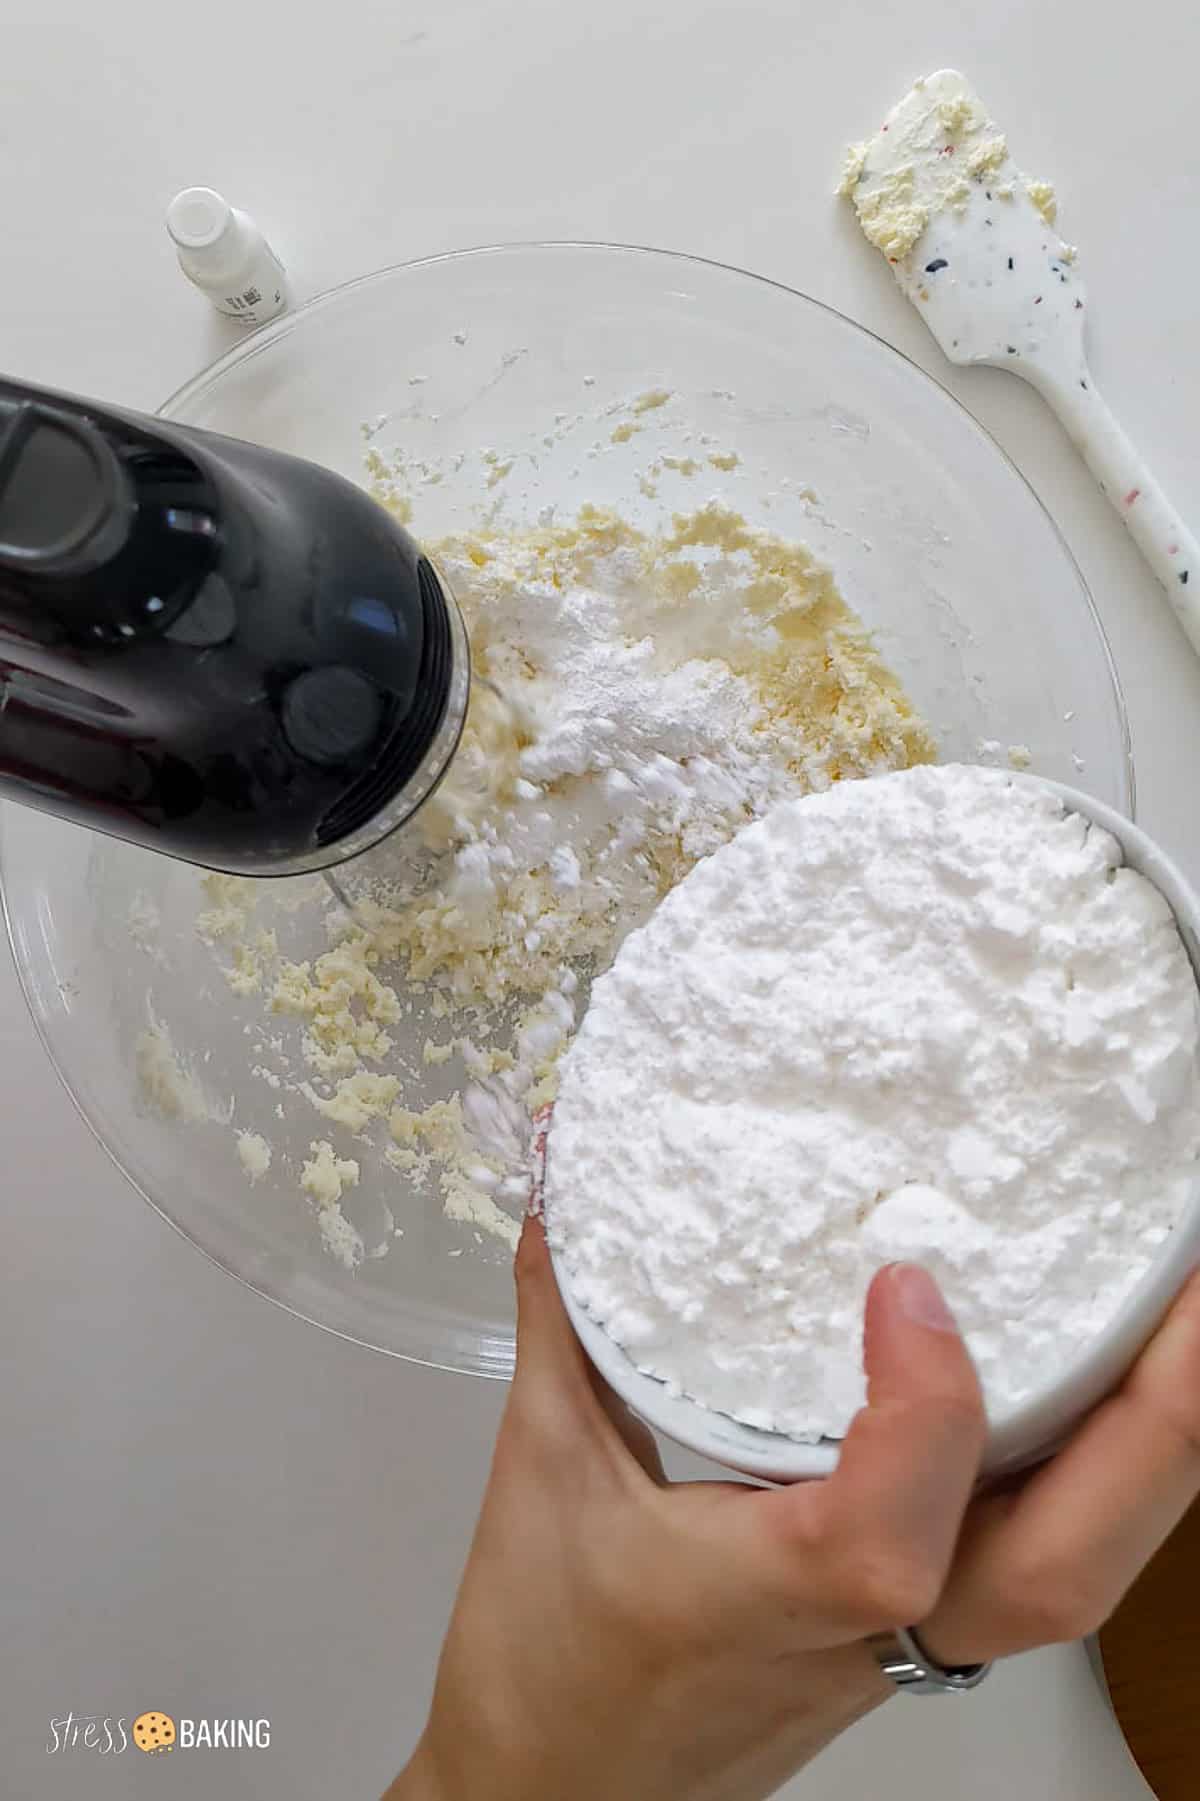 Powdered sugar being added to cream cheese mixture while a hand mixer runs on low speed